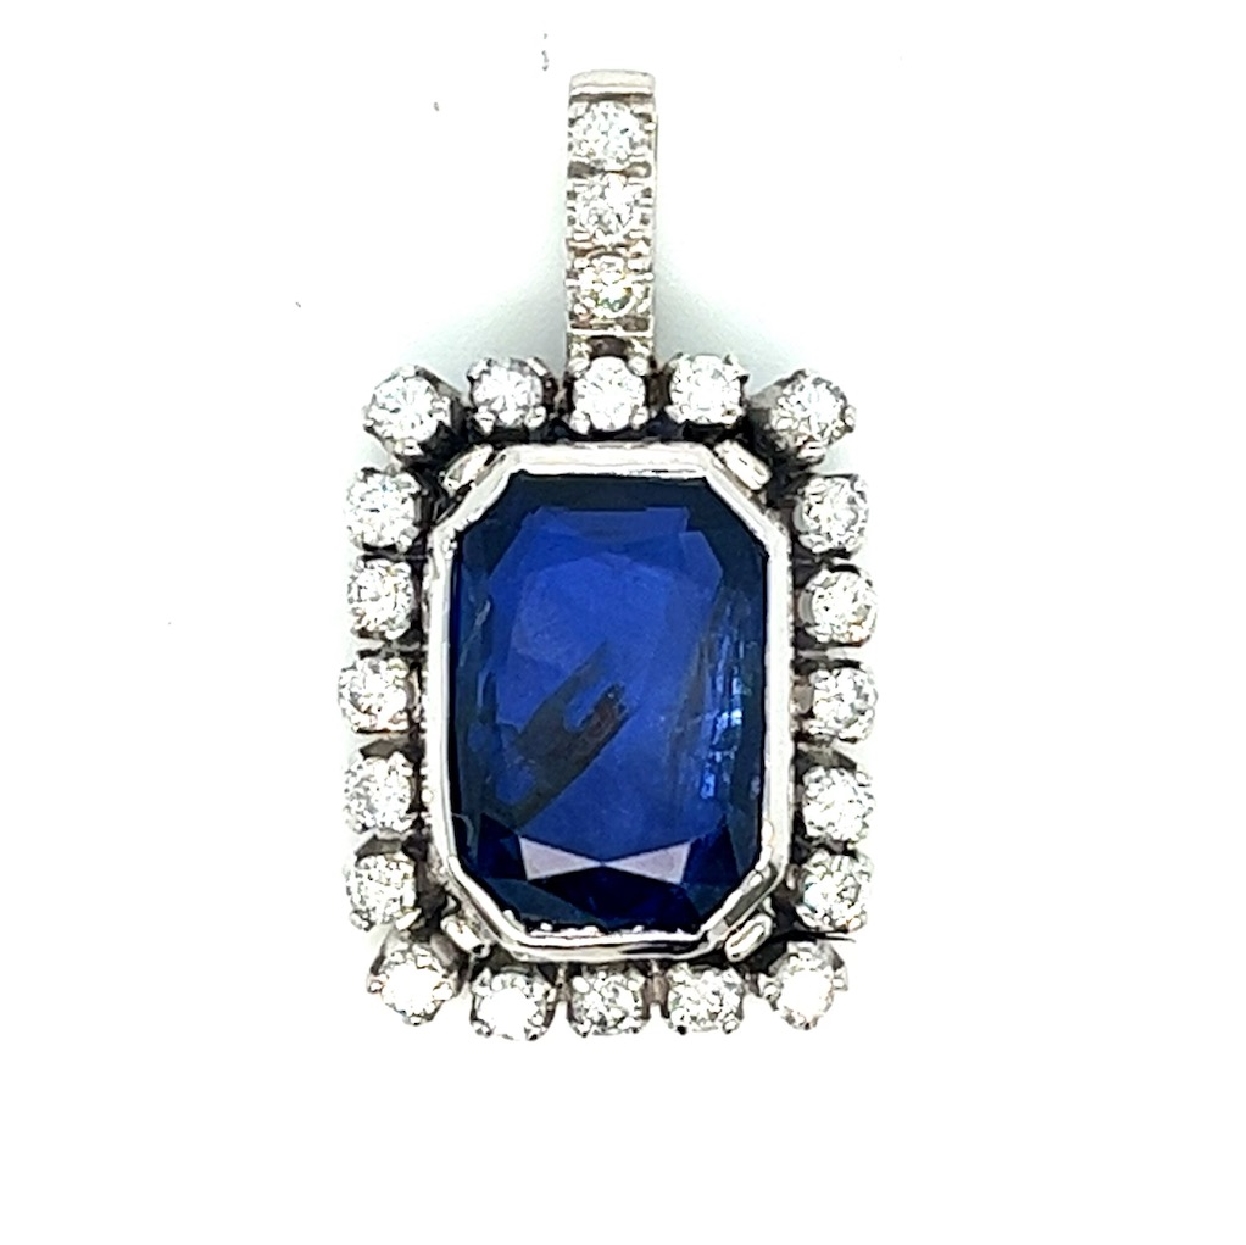 14K White Gold 5.54CT Sapphire and Diamond Pendant 
*Surface Reaching Colored Inclusion
